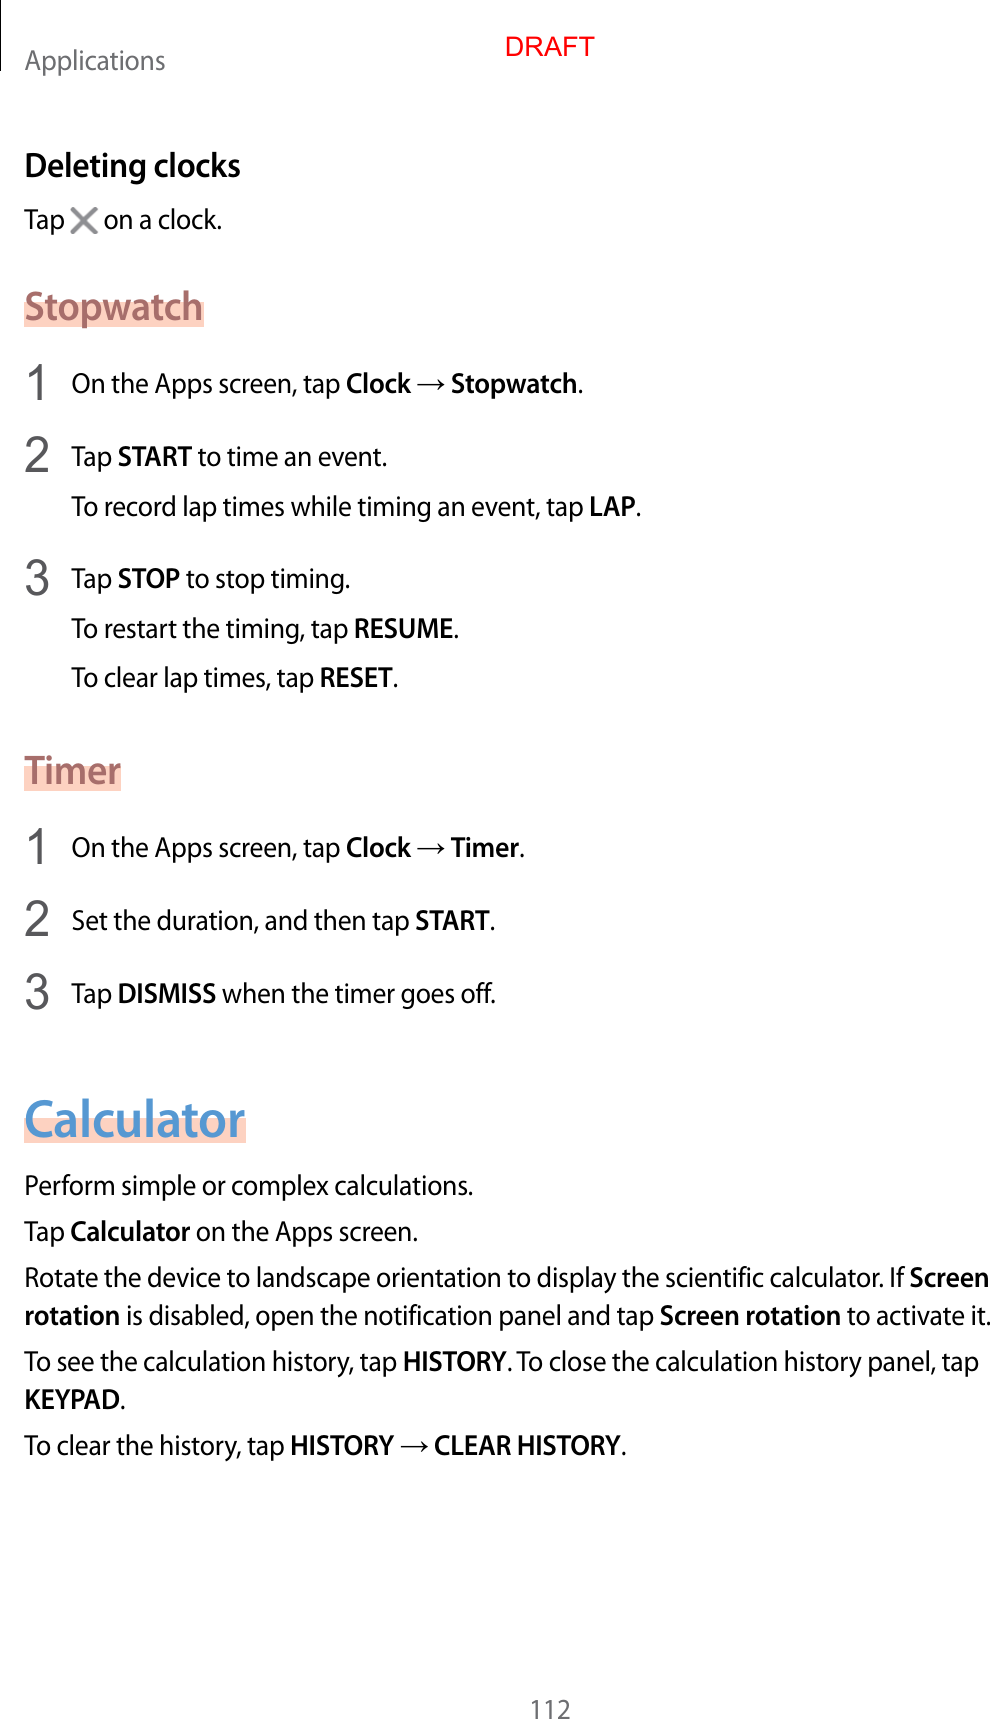 Applications112Deleting clocksTap   on a clock.Stopwatch1  On the Apps screen, tap Clock  Stopwatch.2  Tap START to time an even t.To recor d lap times while timing an ev en t, tap LAP.3  Tap STOP to stop timing .To restart the timing, tap RESUME.To clear lap times, tap RESET.Timer1  On the Apps screen, tap Clock  Timer.2  Set the duration, and then tap START.3  Tap DISMISS when the timer goes off.CalculatorP erform simple or complex calculations .Tap Calculator on the Apps screen.Rotate the device t o landscape orientation t o display the scien tific calculat or. If Screen rotation is disabled, open the notification panel and tap Screen rota tion to activate it.To see the calculation history , tap HISTORY. To close the calculation history panel, tap KEYPAD.To clear the history, tap HISTORY  CLEAR HISTORY.DRAFT